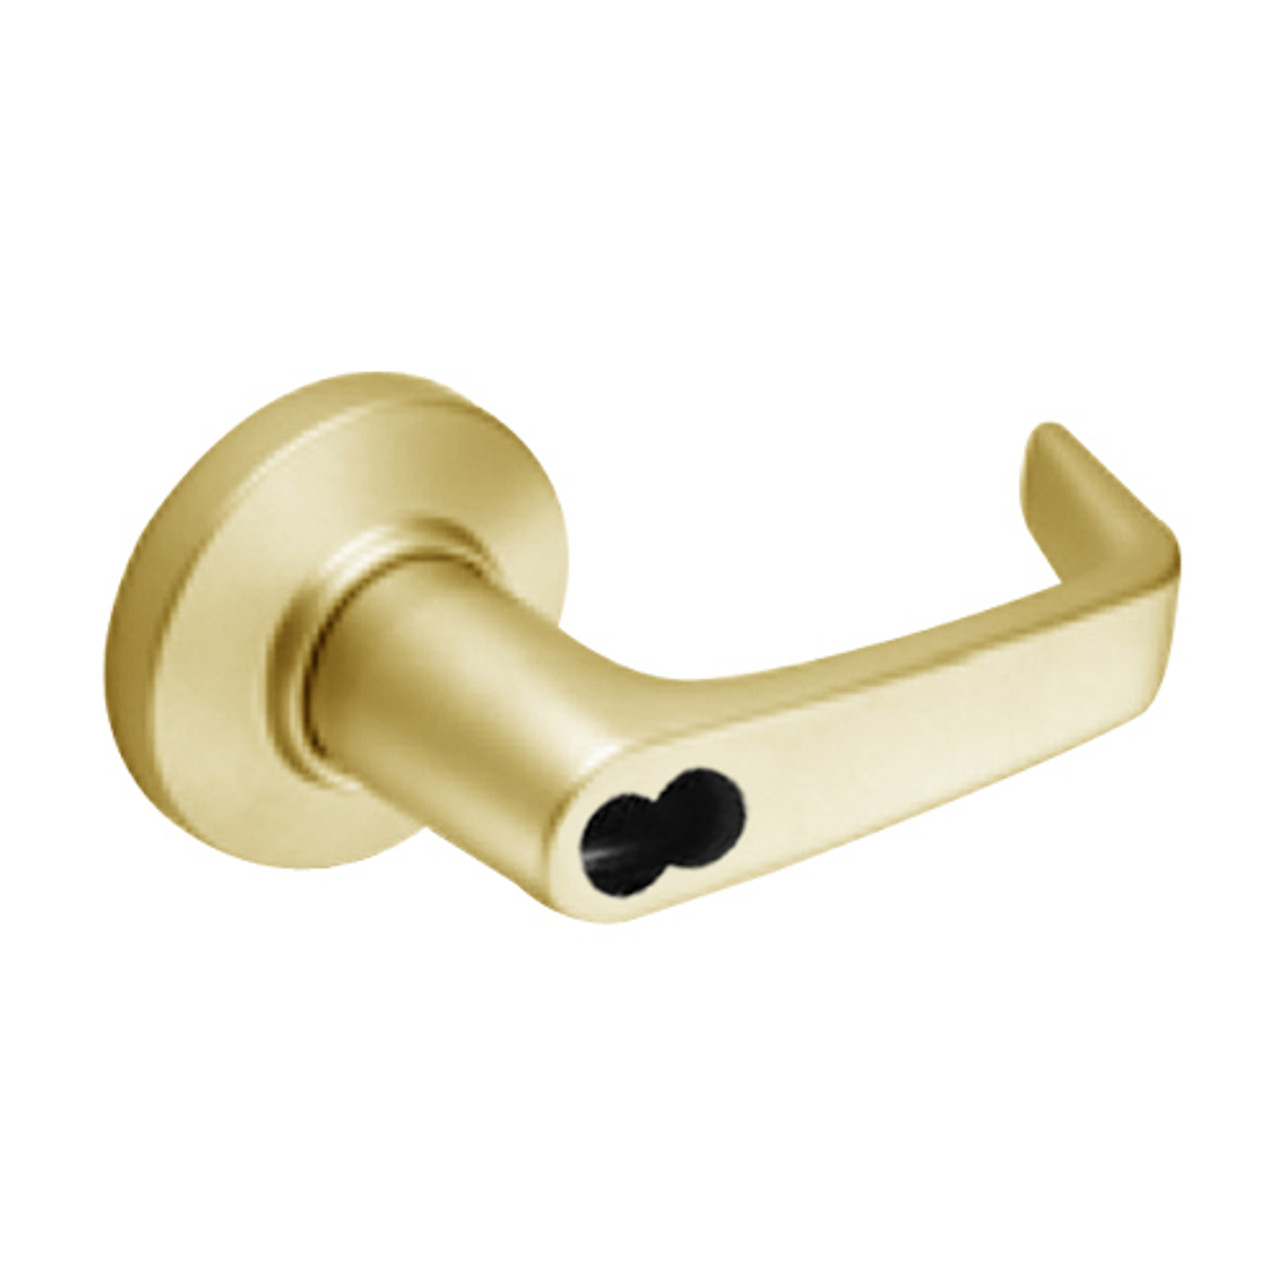 9K47W15CS3605 Best 9K Series Institutional Cylindrical Lever Locks with Contour Angle with Return Lever Design Accept 7 Pin Best Core in Bright Brass